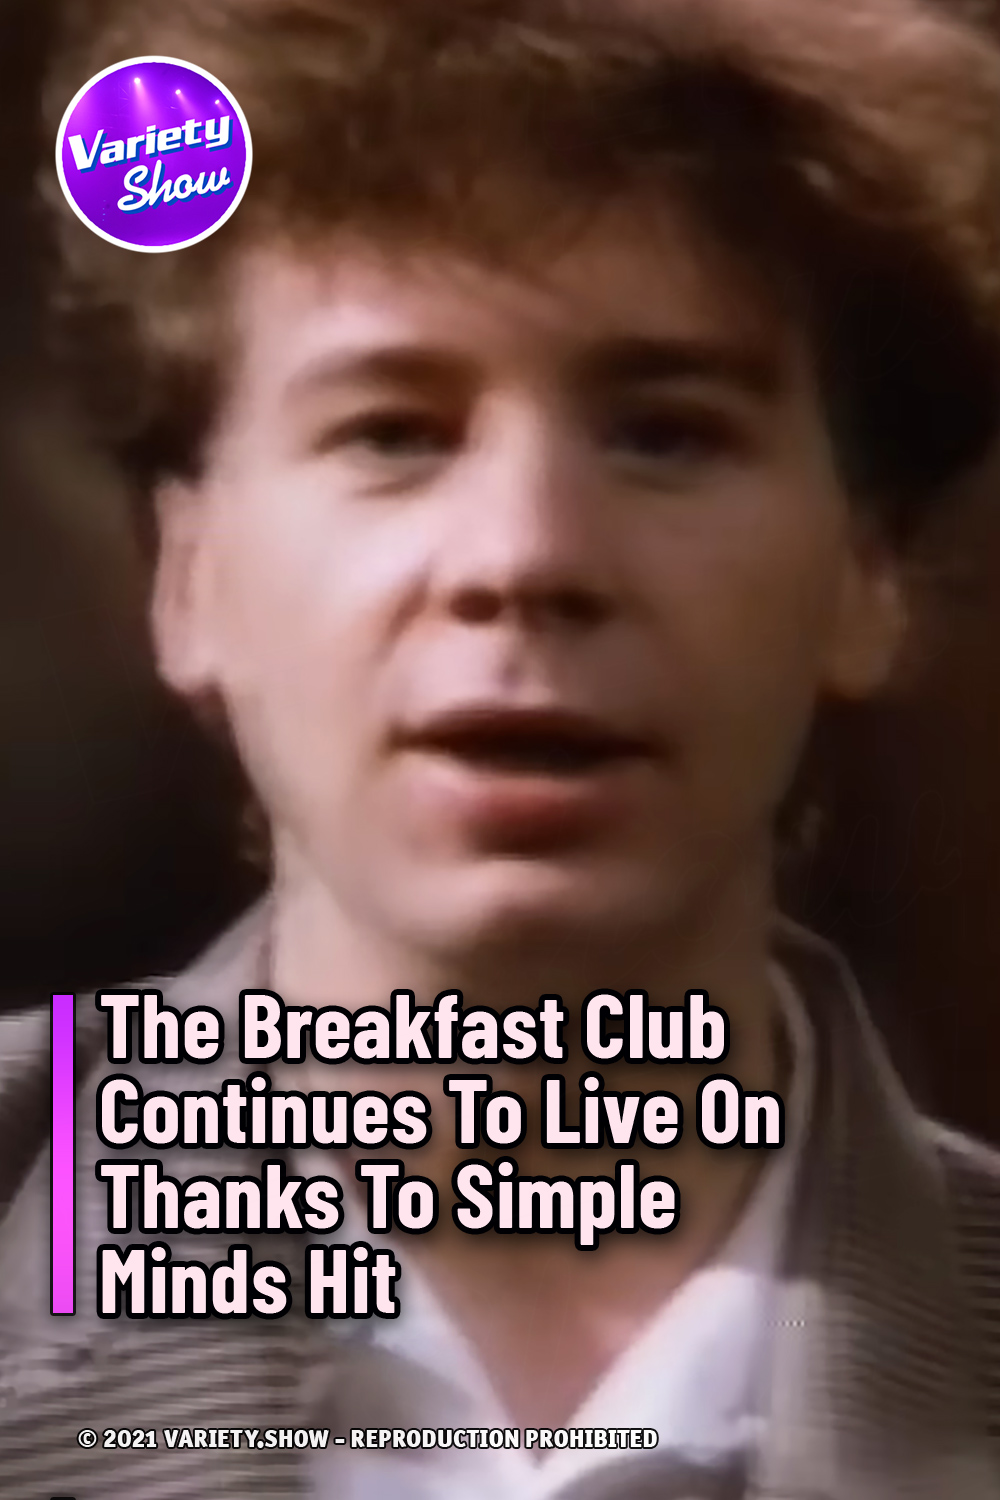 The Breakfast Club Continues To Live On Thanks To Simple Minds Hit